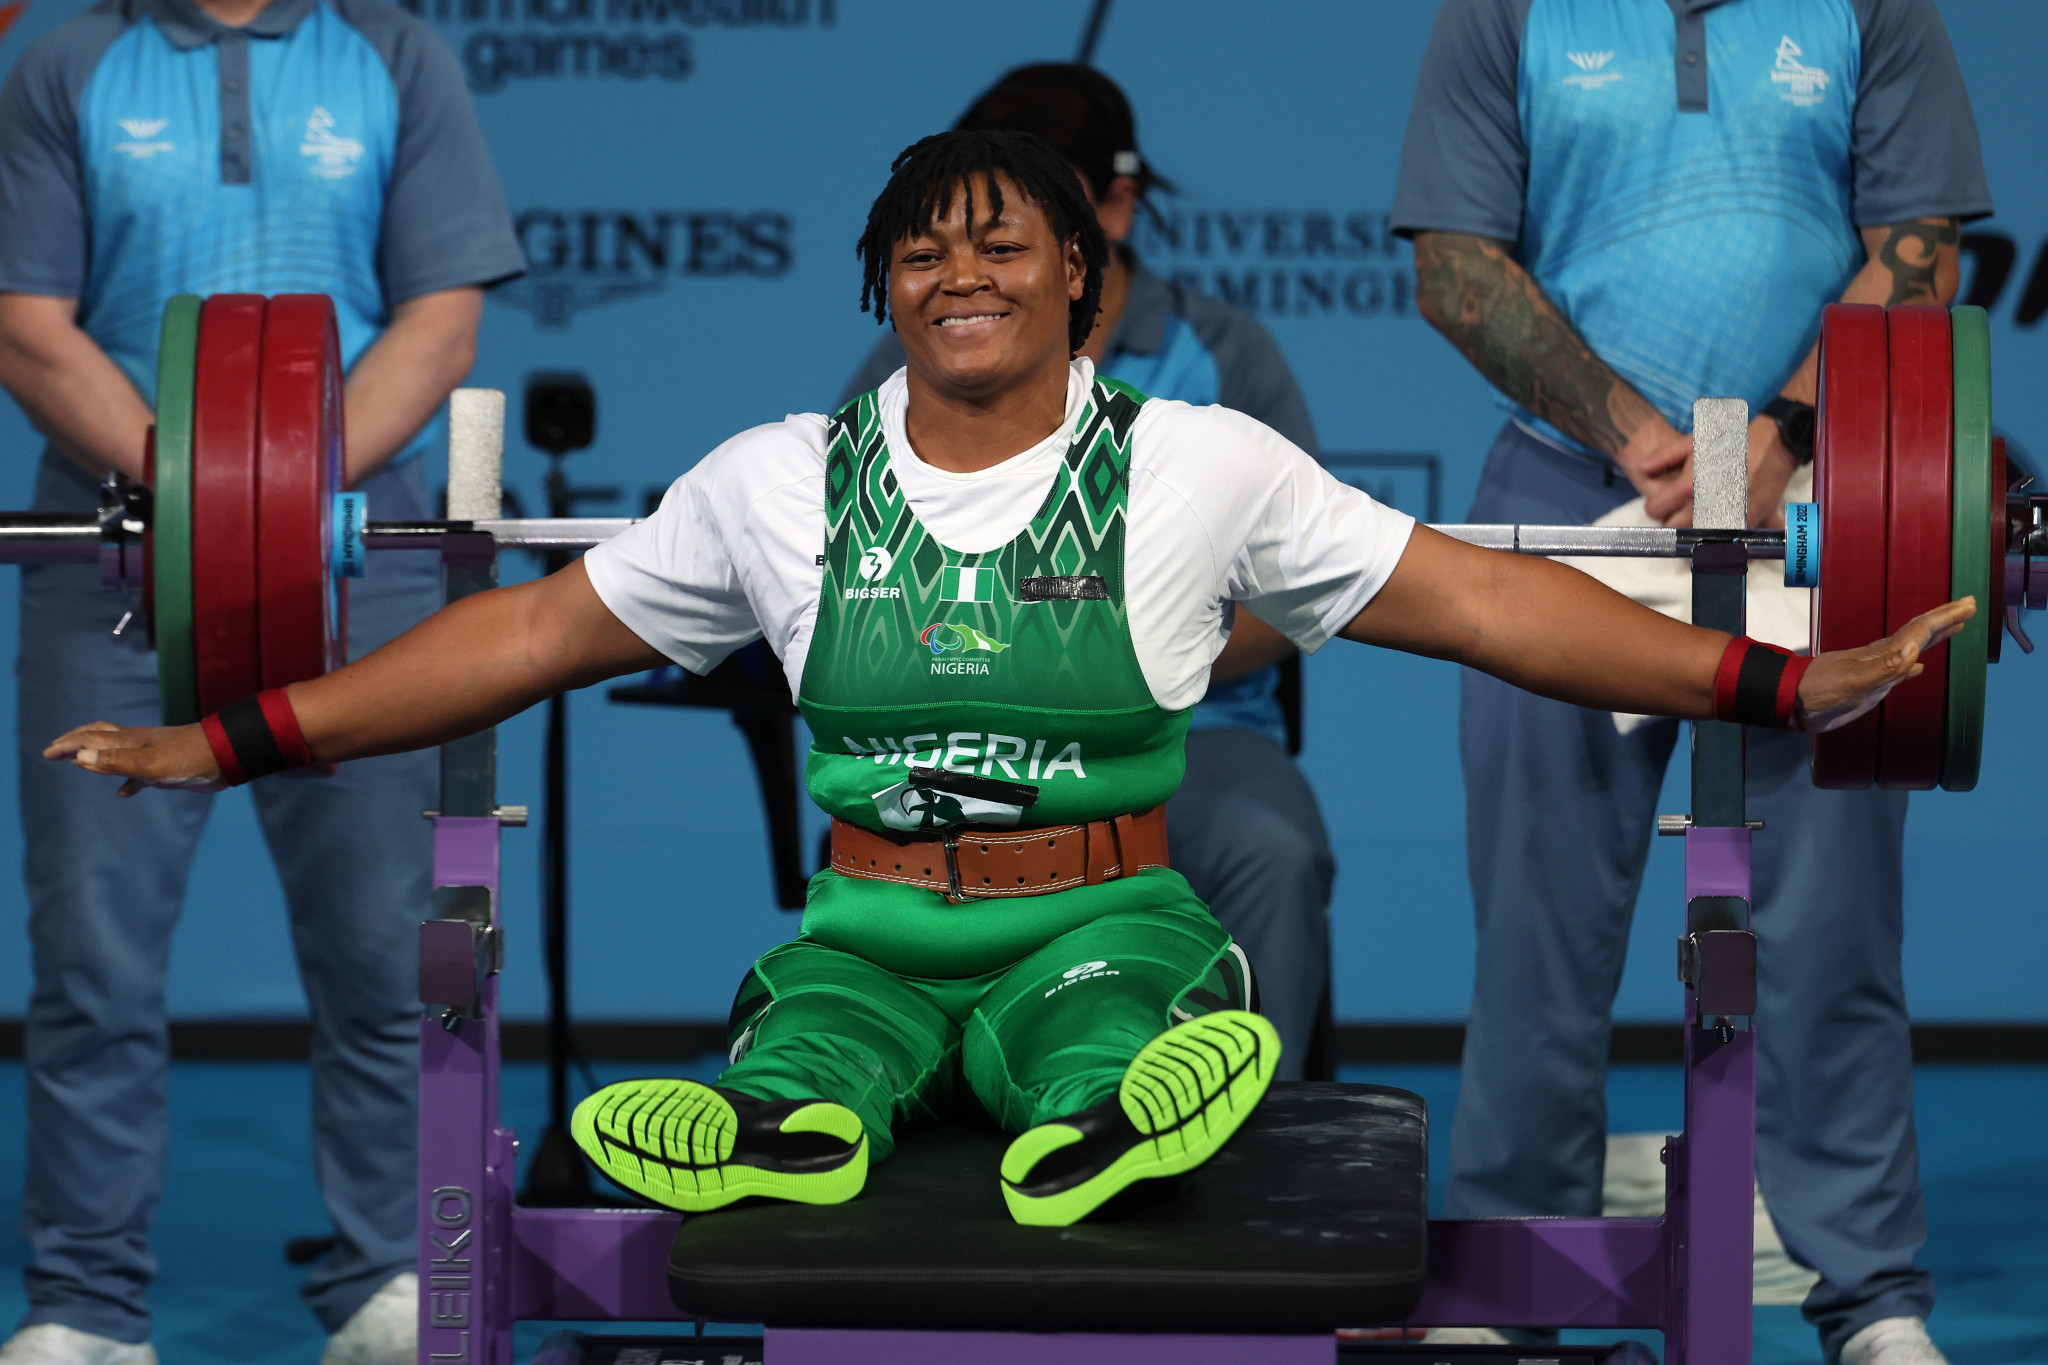 Alice Folashade Oluwafemiayo set a women's 86kg world record to claim women's heavyweight gold for Nigeria at Birmingham 2022 ©Getty Images